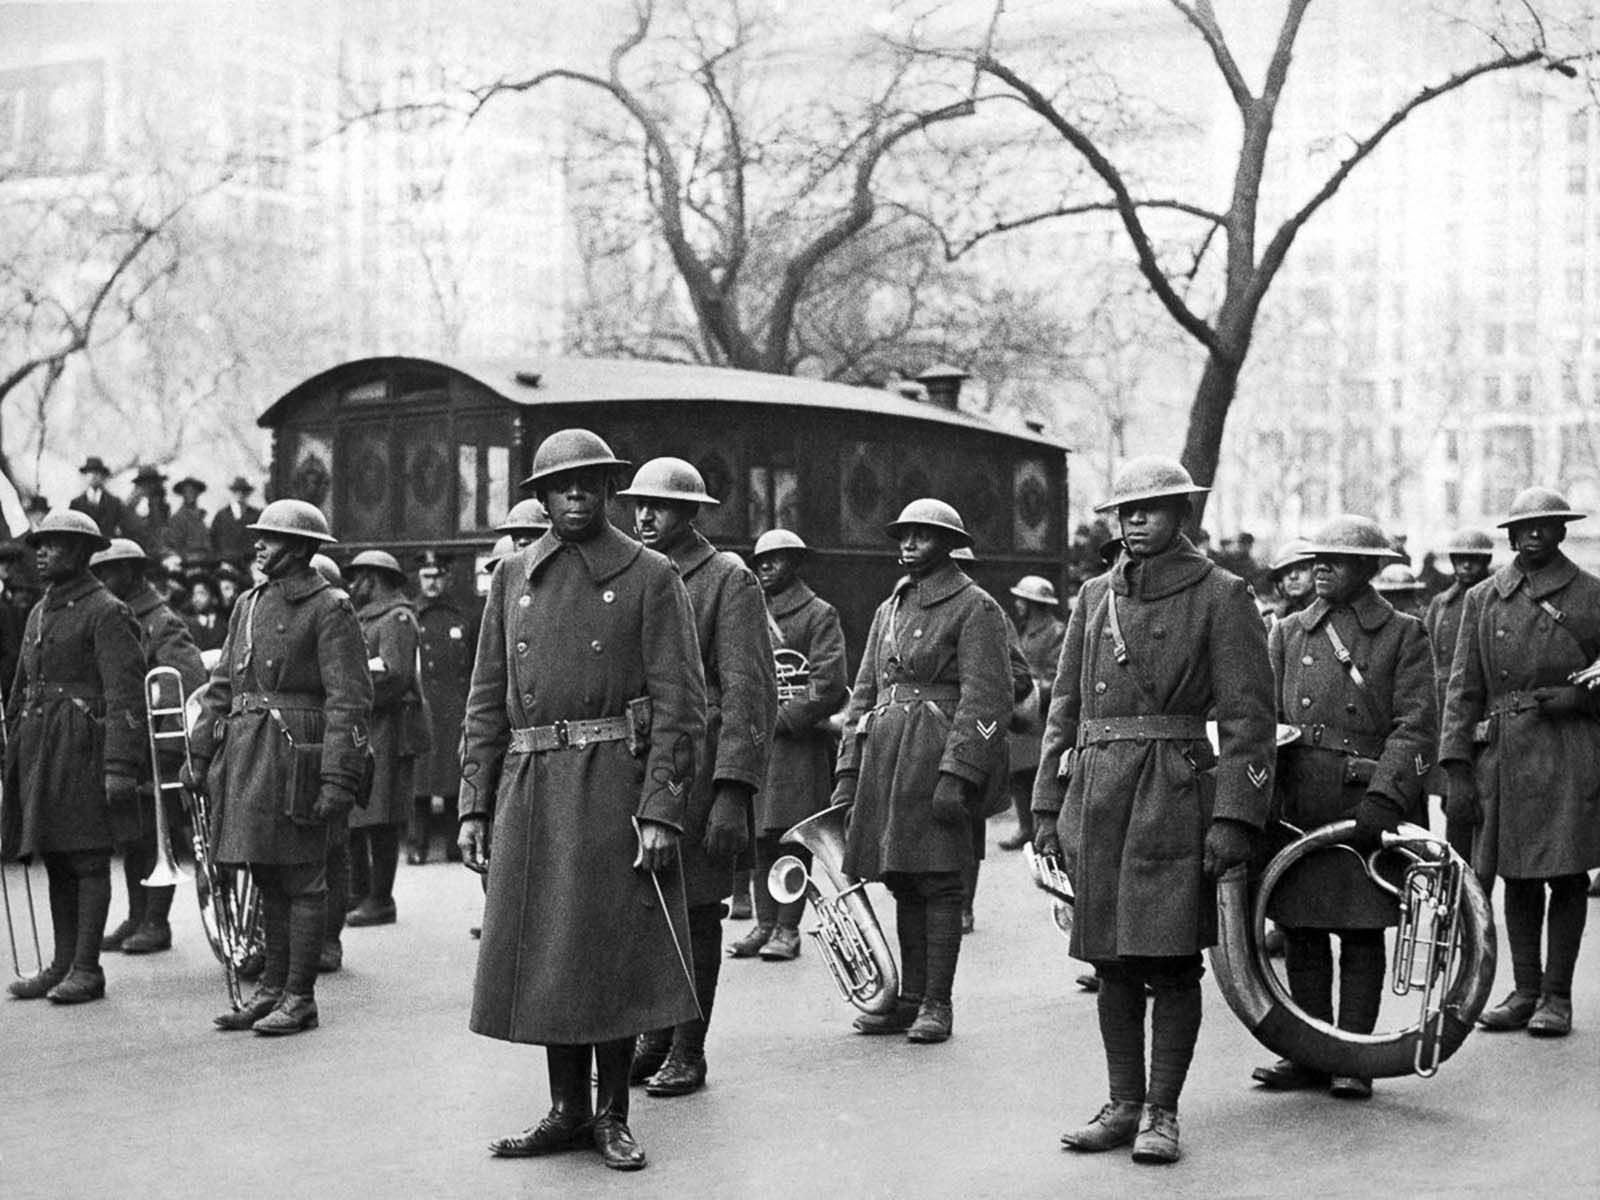 Lt. Reese leads the 369th band in a parade upon their return to New York City.